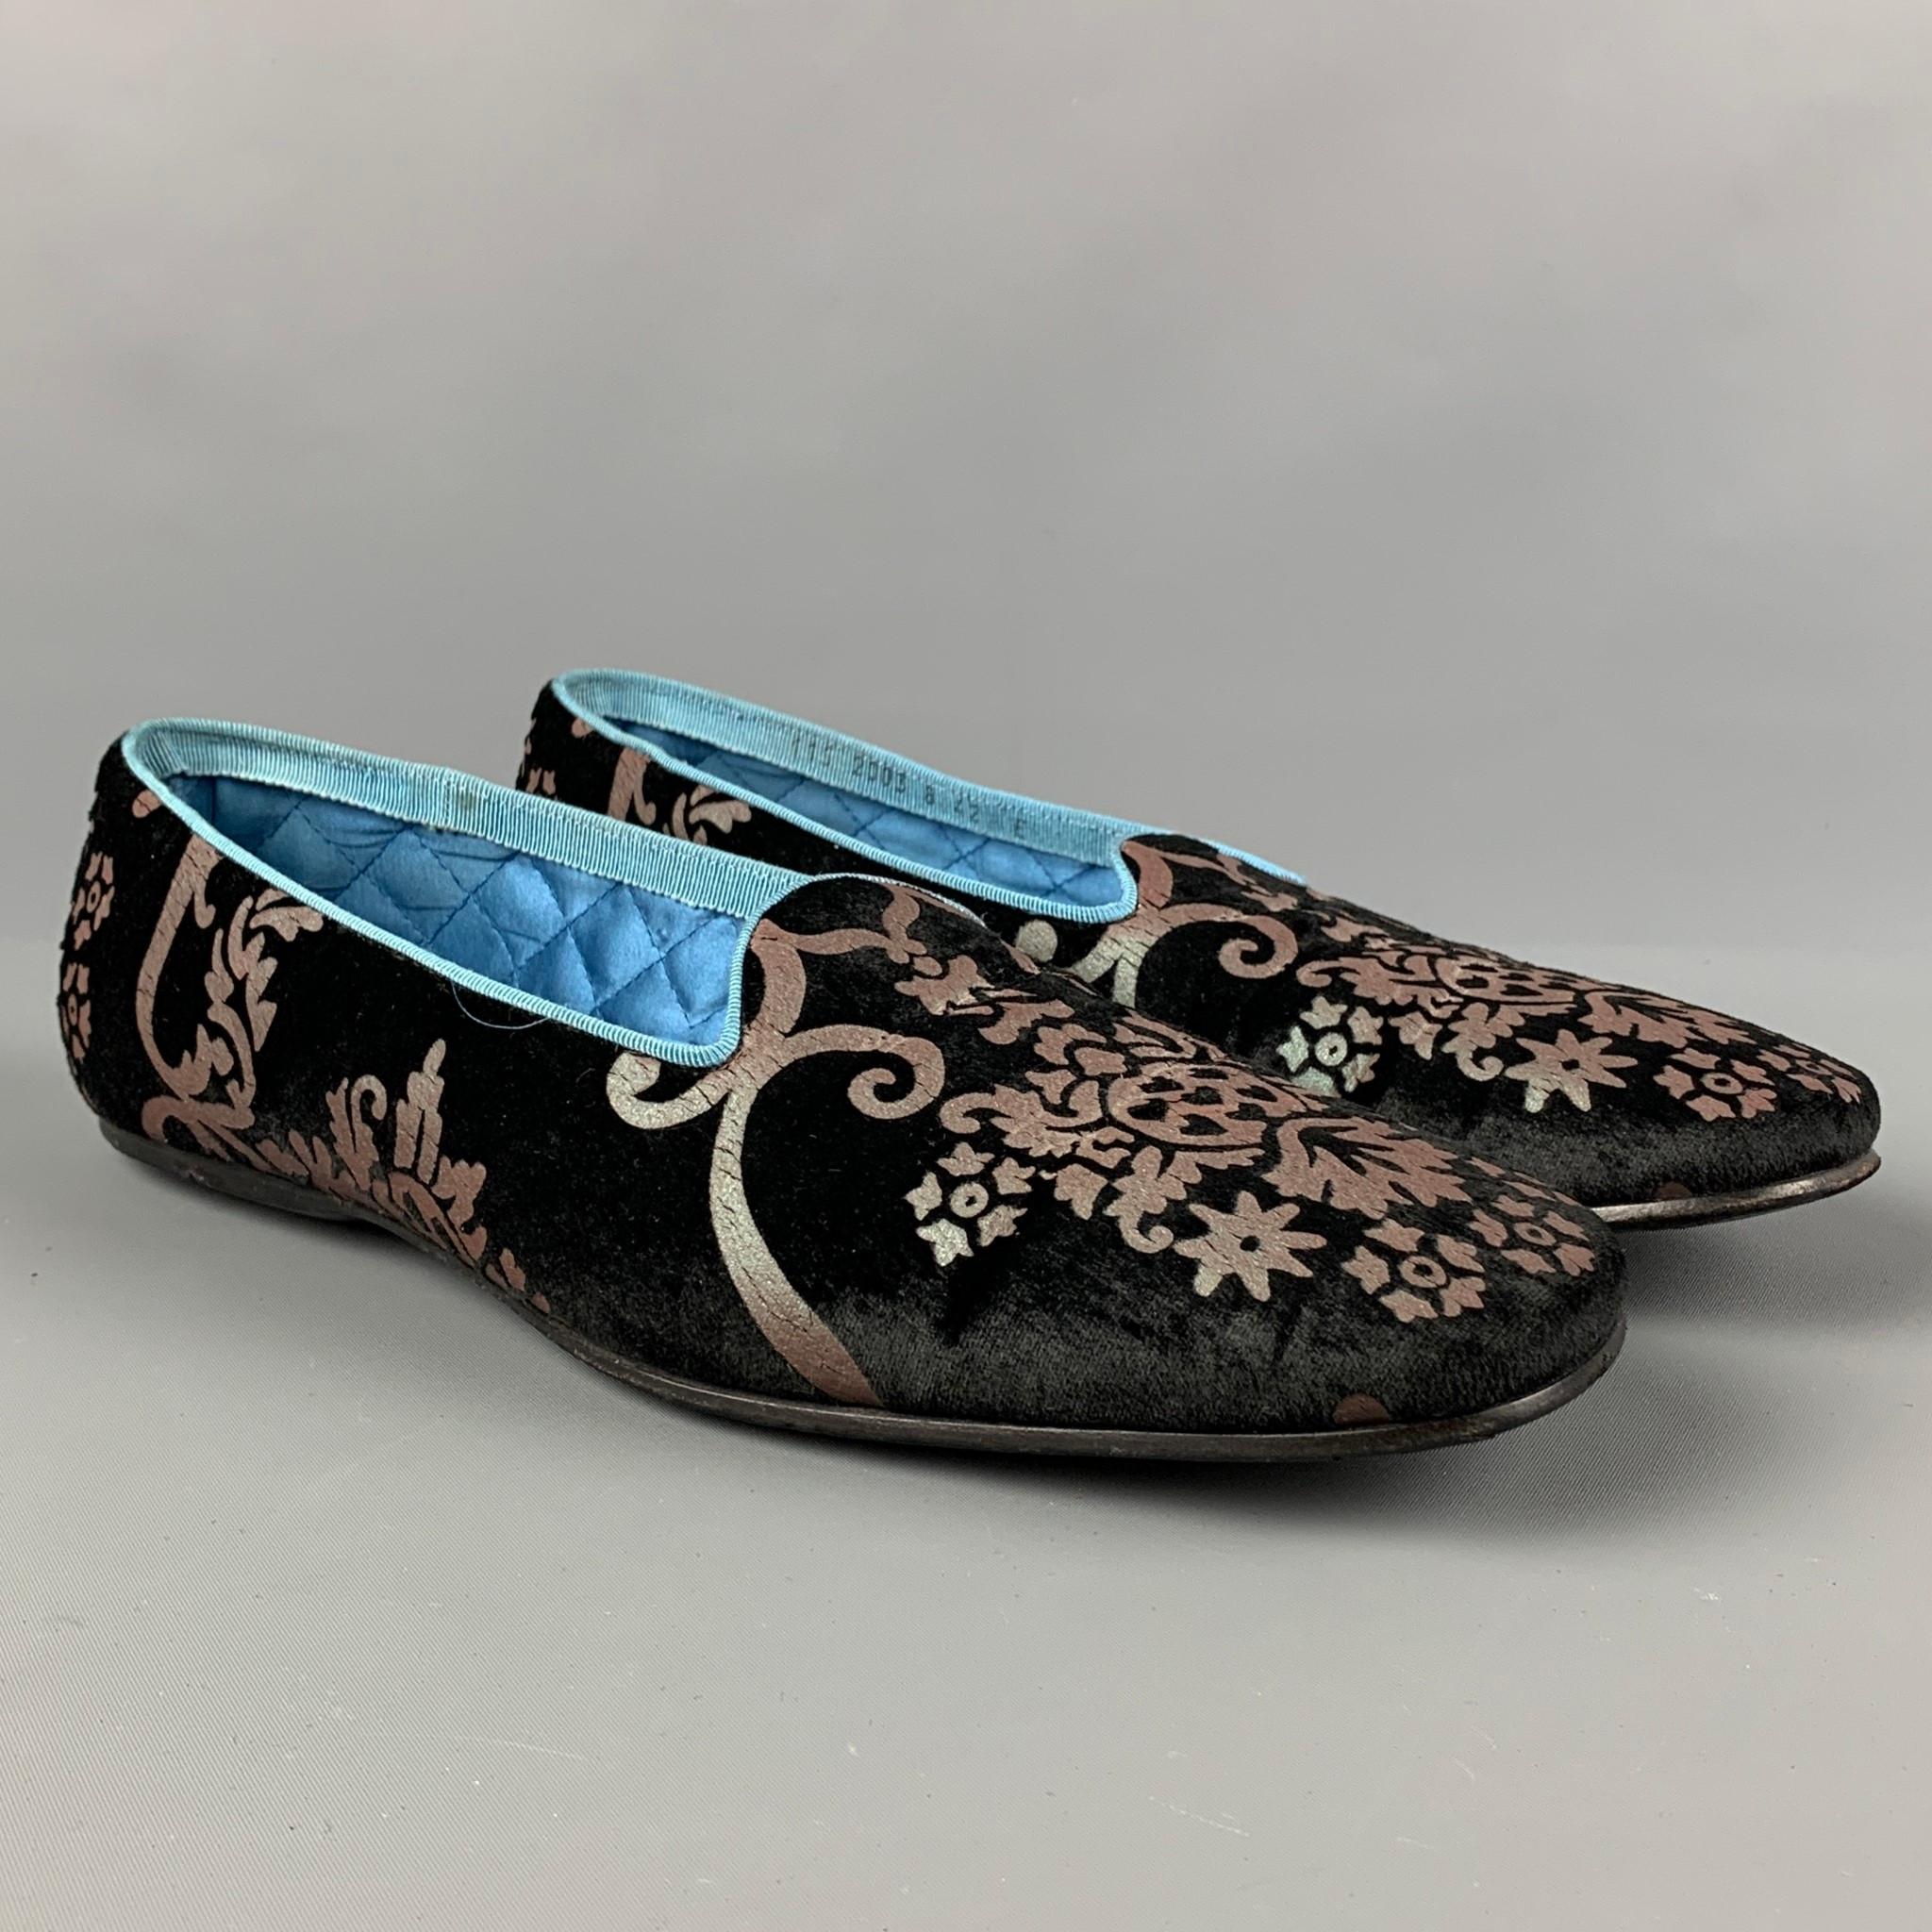 Vintage GUCCI by Tom Ford 2003 Size 9 Black Floral Jacquard Slippers Loafers 1